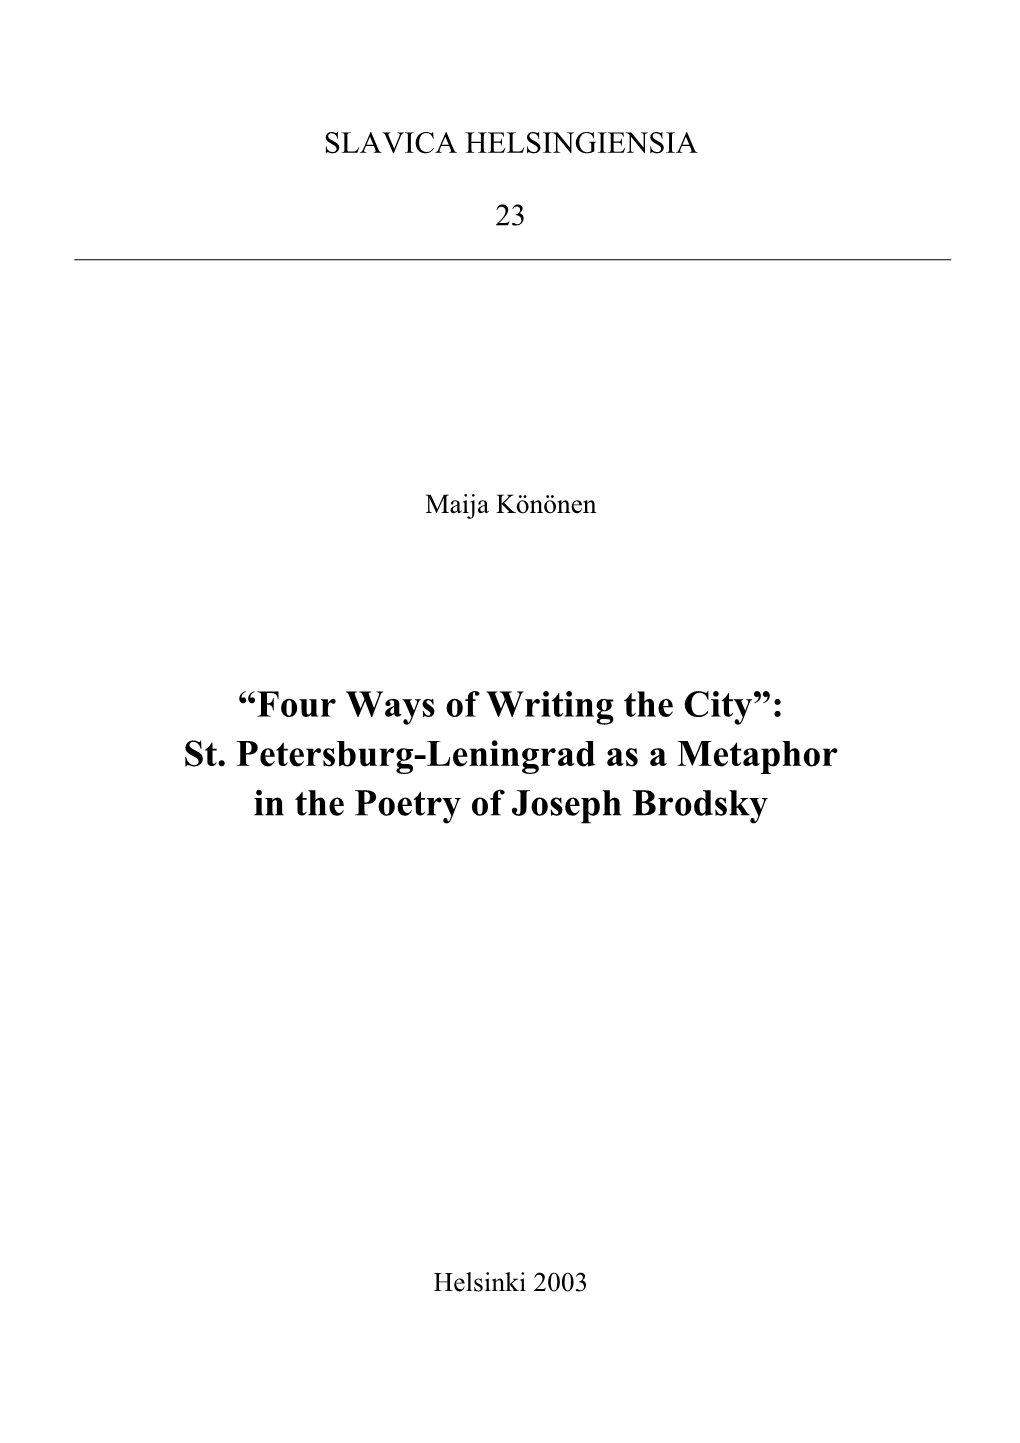 Four Ways of Writing the City“: St. Petersburg-Leningrad As A